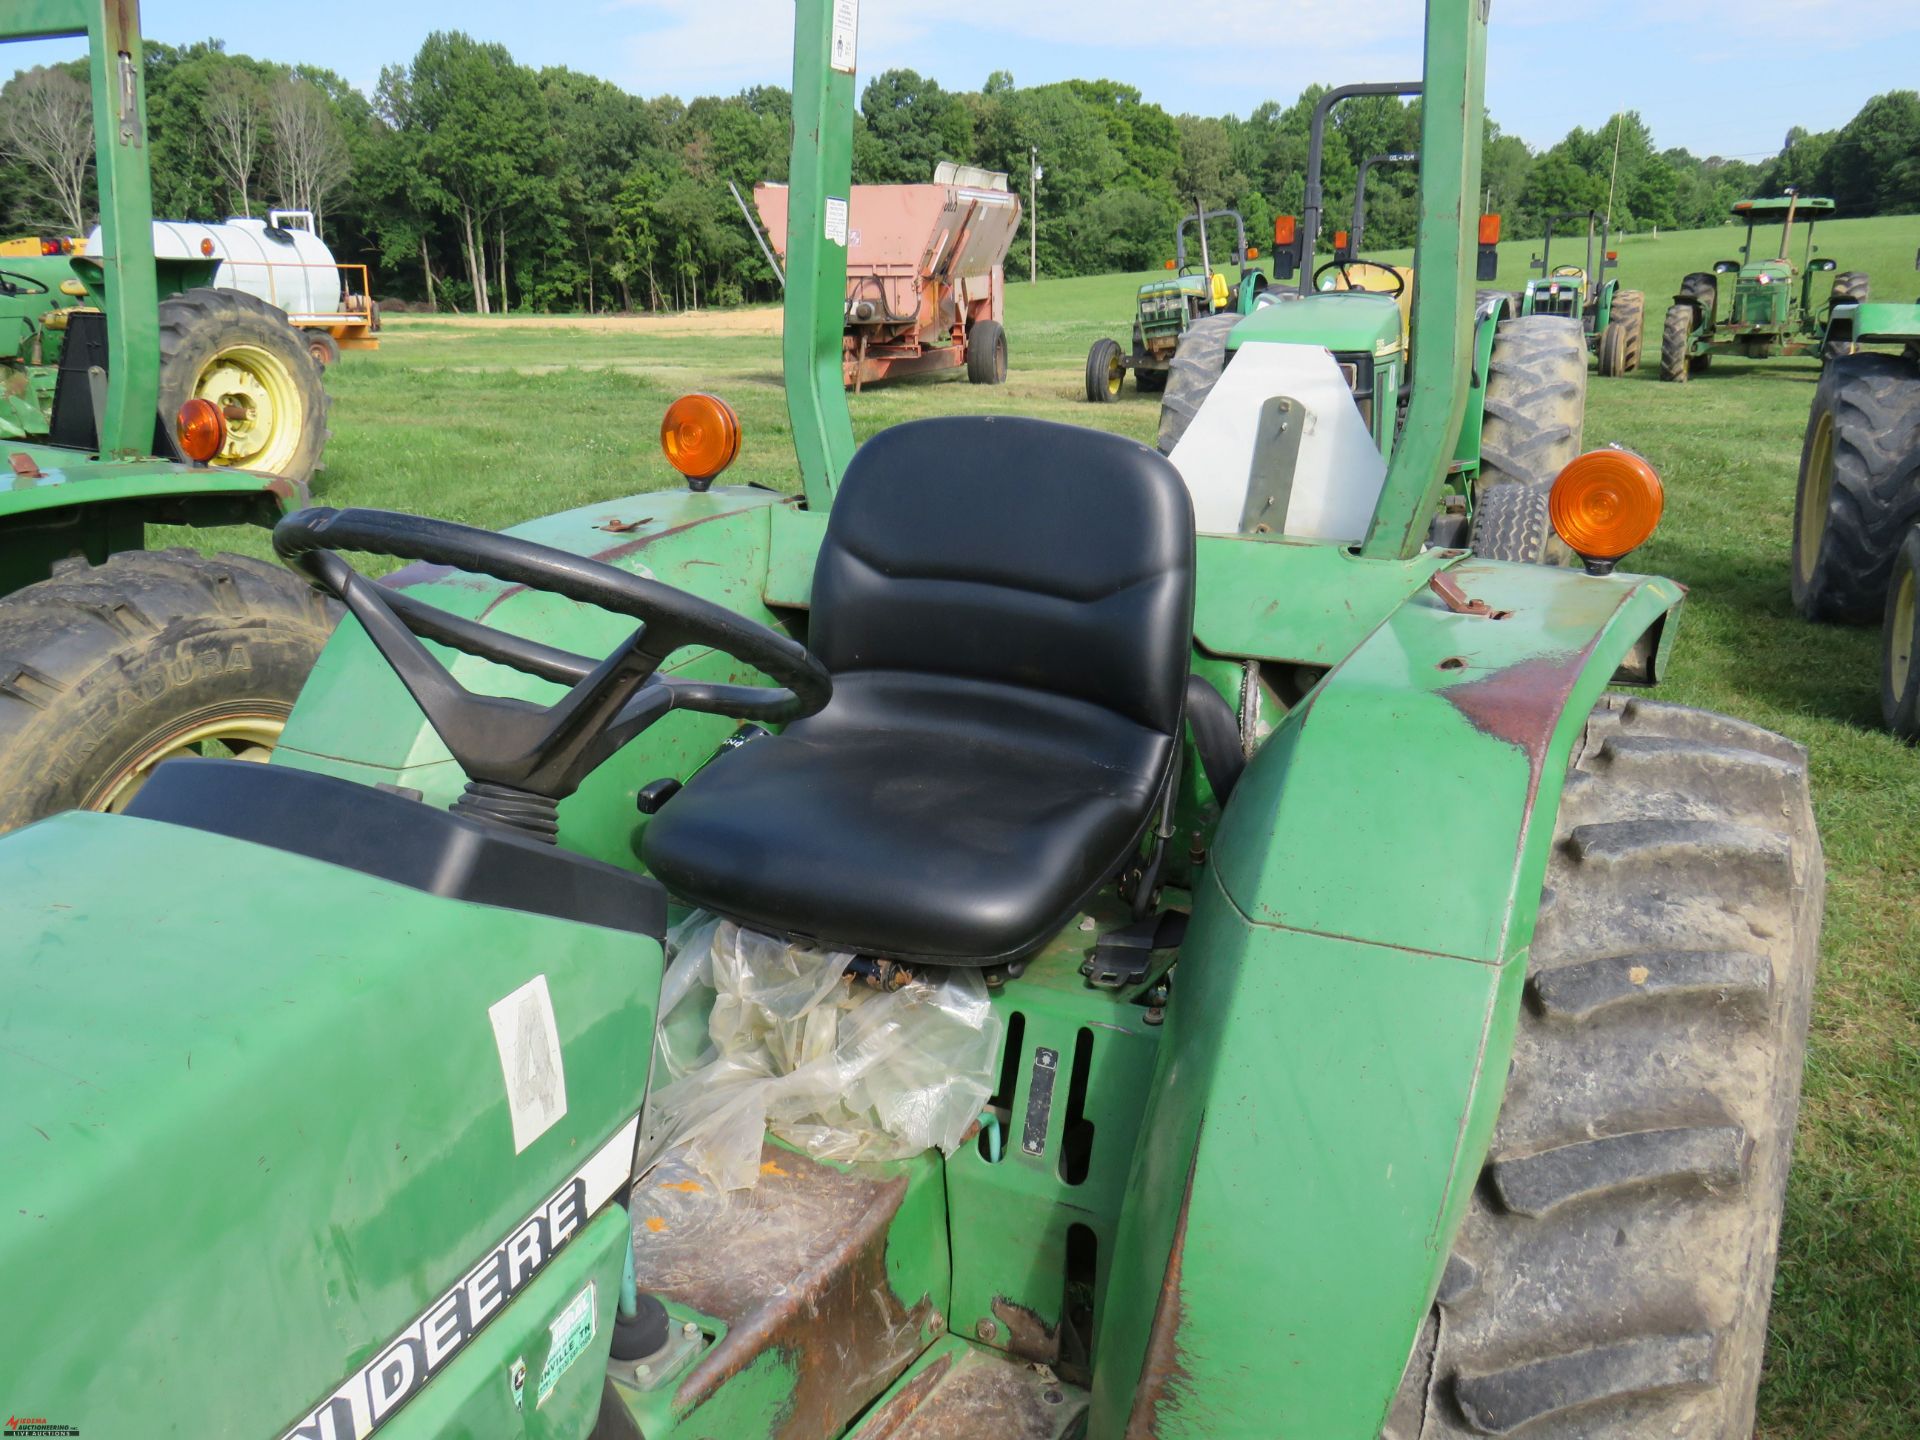 2001 JOHN DEERE 990 TRACTOR, PTO, NO 3PT ARMS, 14.9-24 TIRES, 5555 HOURS SHOWING (HOURS SUBJECT TO - Image 7 of 8